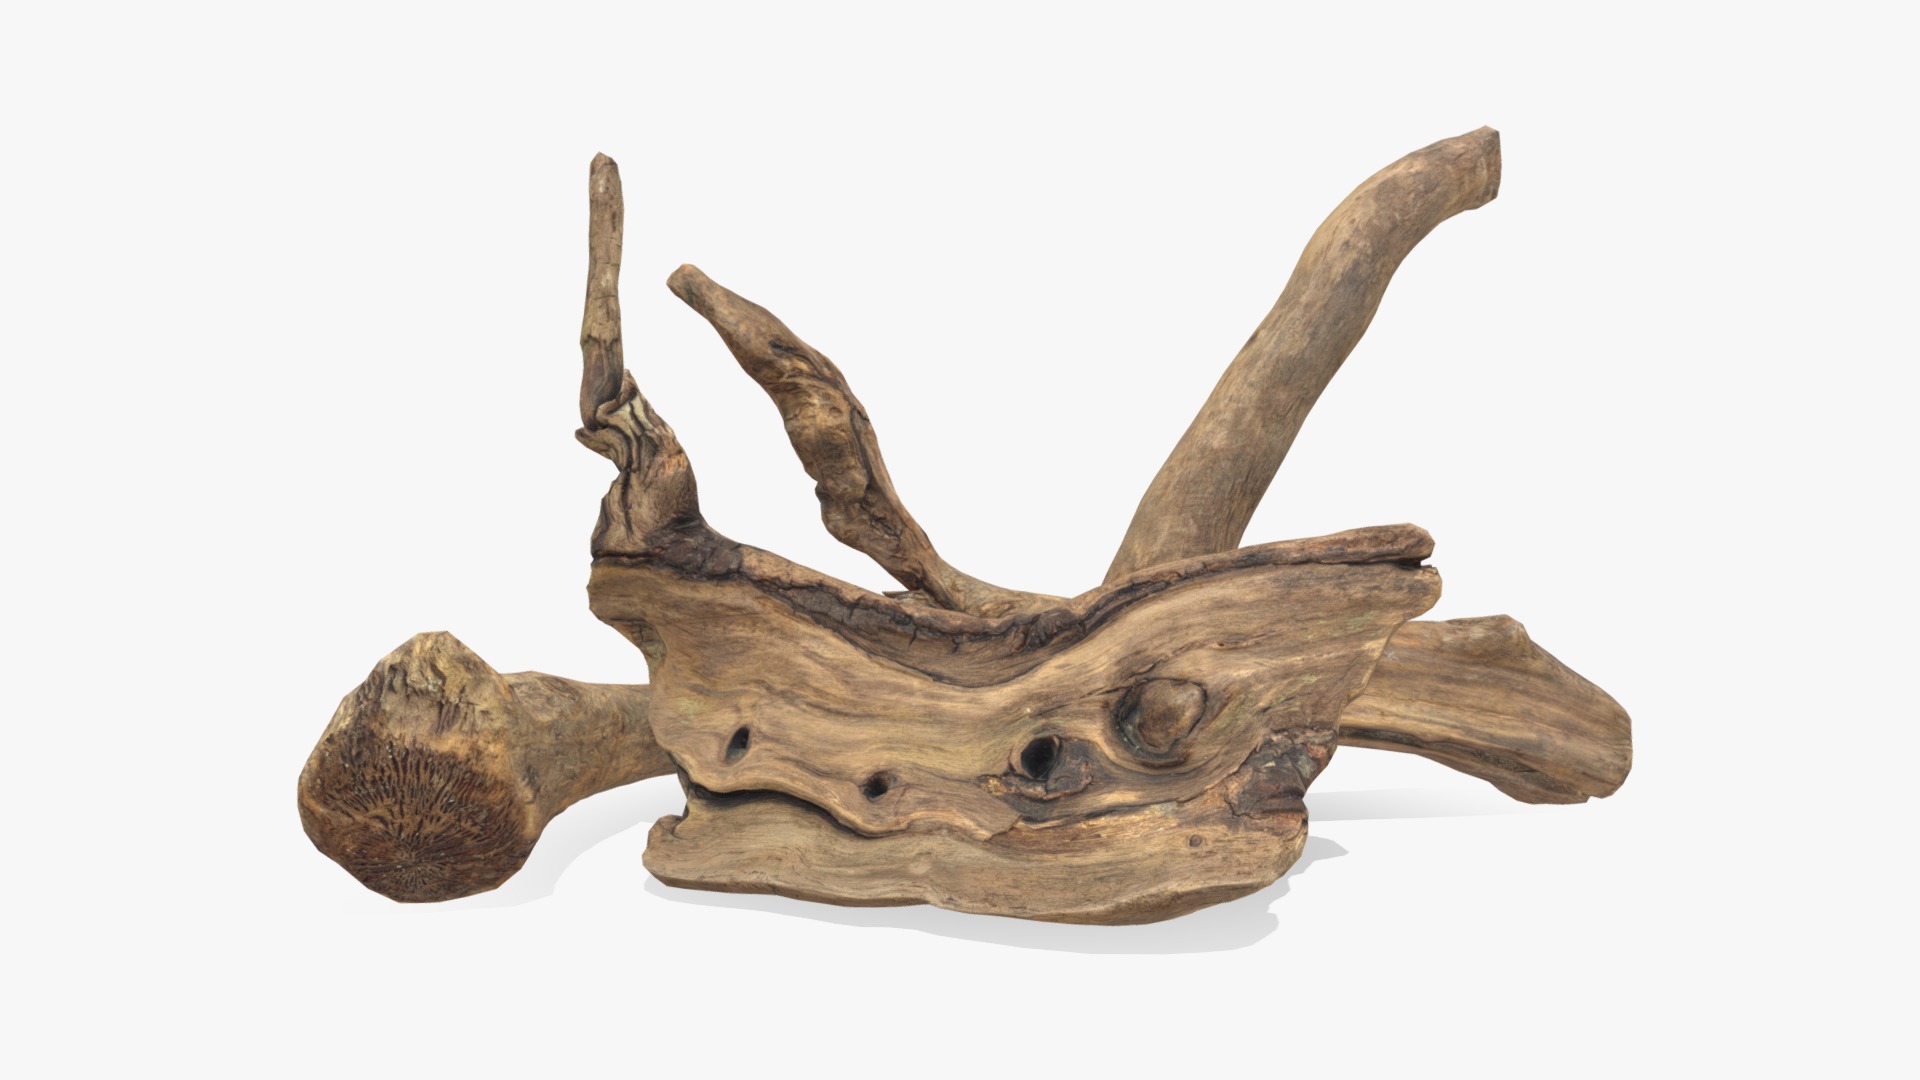 3D model Old Wood Roots - This is a 3D model of the Old Wood Roots. The 3D model is about a wooden carving of a deer.